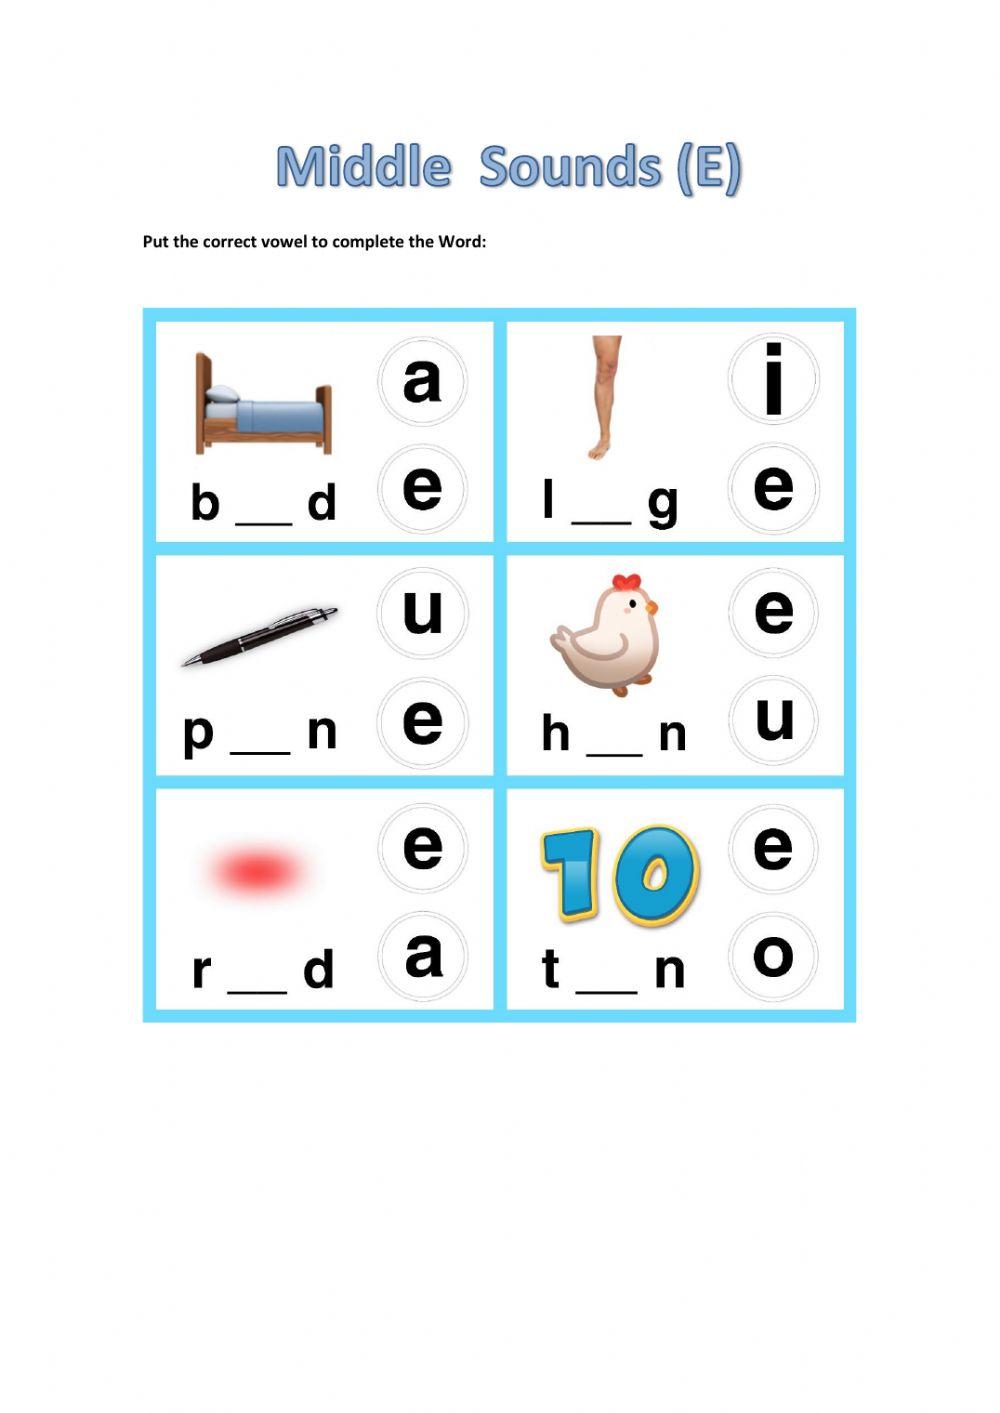 Words with the letter E